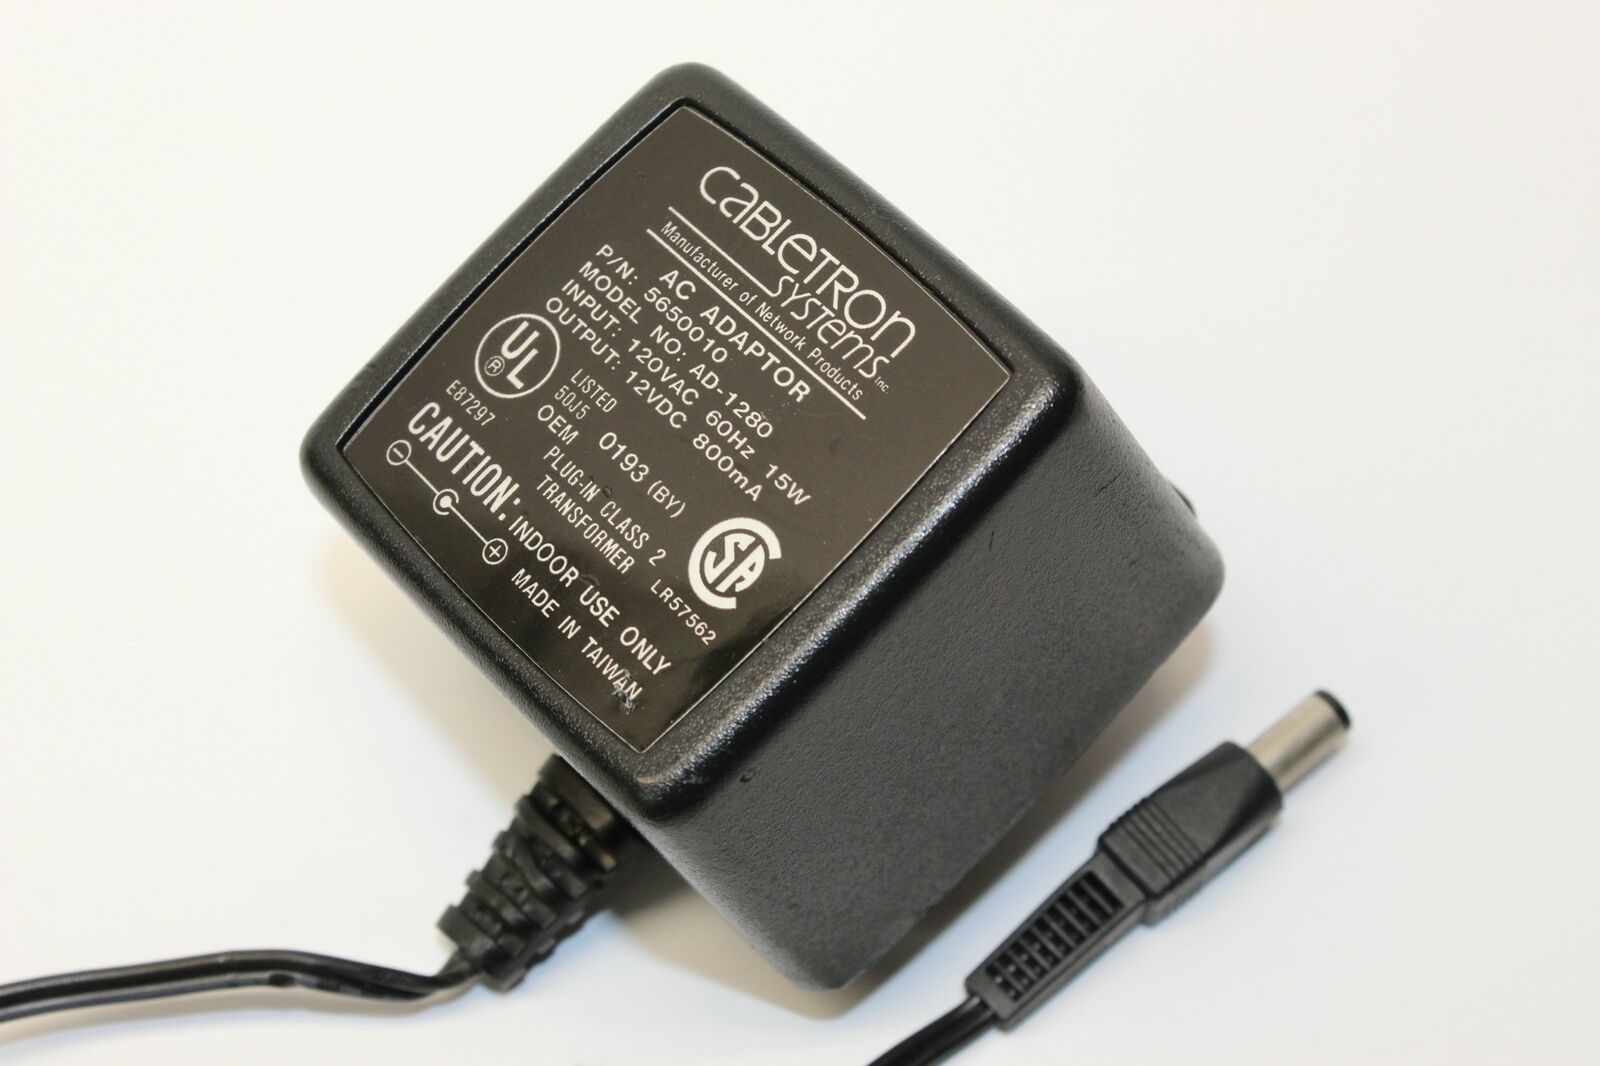 NEW Cabletron AD-1280 AC Adaptor 12VDC 800mA 5650010 Transformer Power Supply Adapter